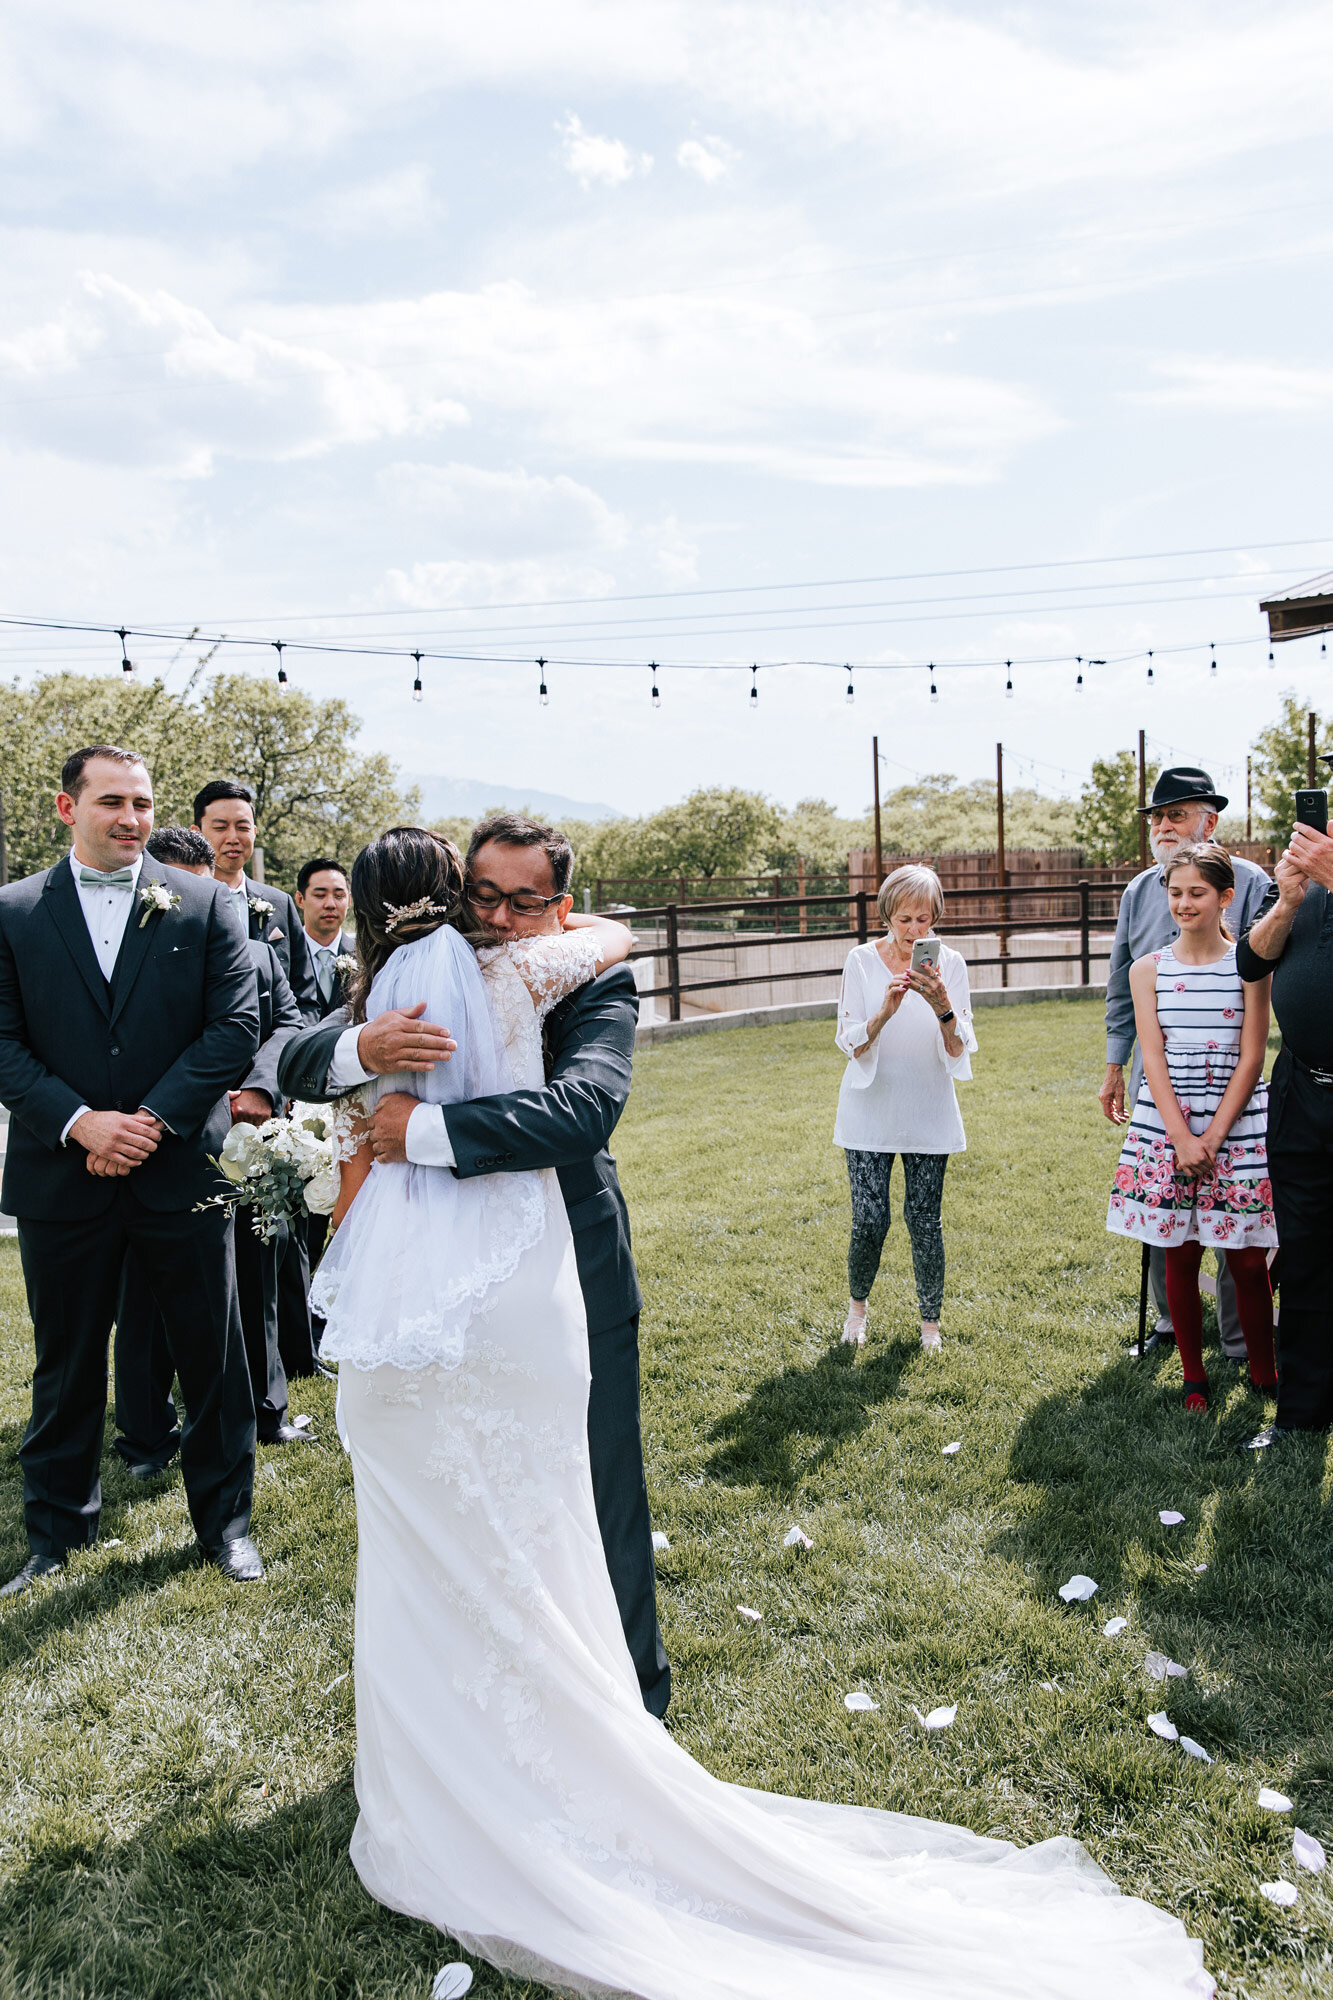  Emily Jenkins Photography captures a bride hugging her father at the end of the aisle at Quiet Meadow Farms a wedding venue in Utah. father hugs bride long classy wedding gown  farm wedding #emilyjenkinsphotography #emilyjenkinsweddings #utahwedding